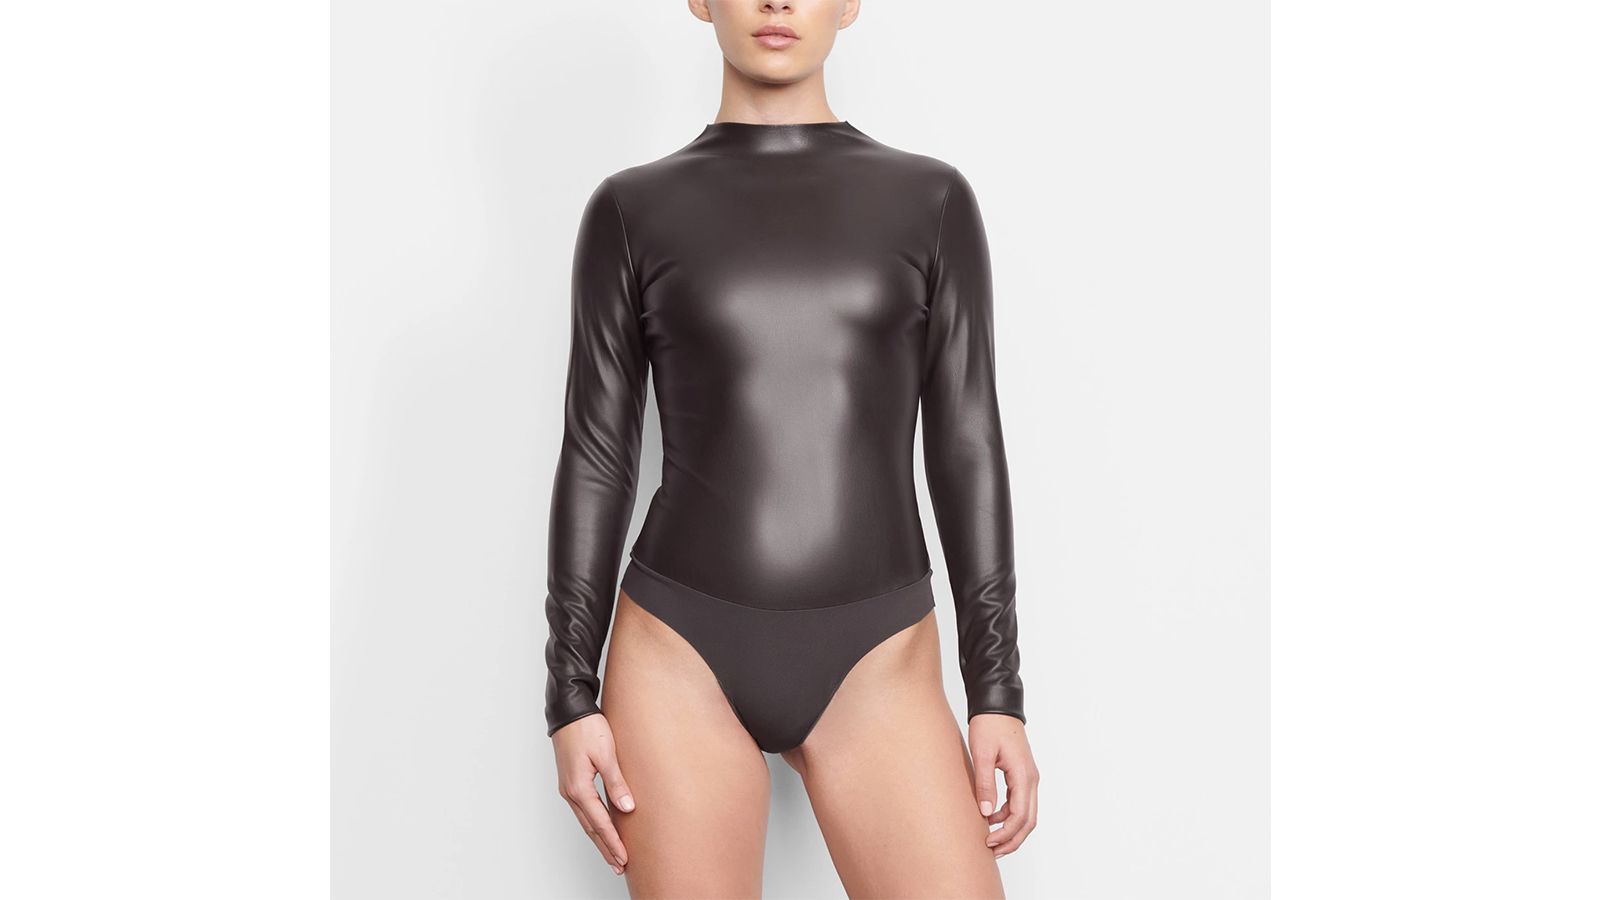 Track Faux Leather High Neck Bodysuit - Cocoa - XL at Skims